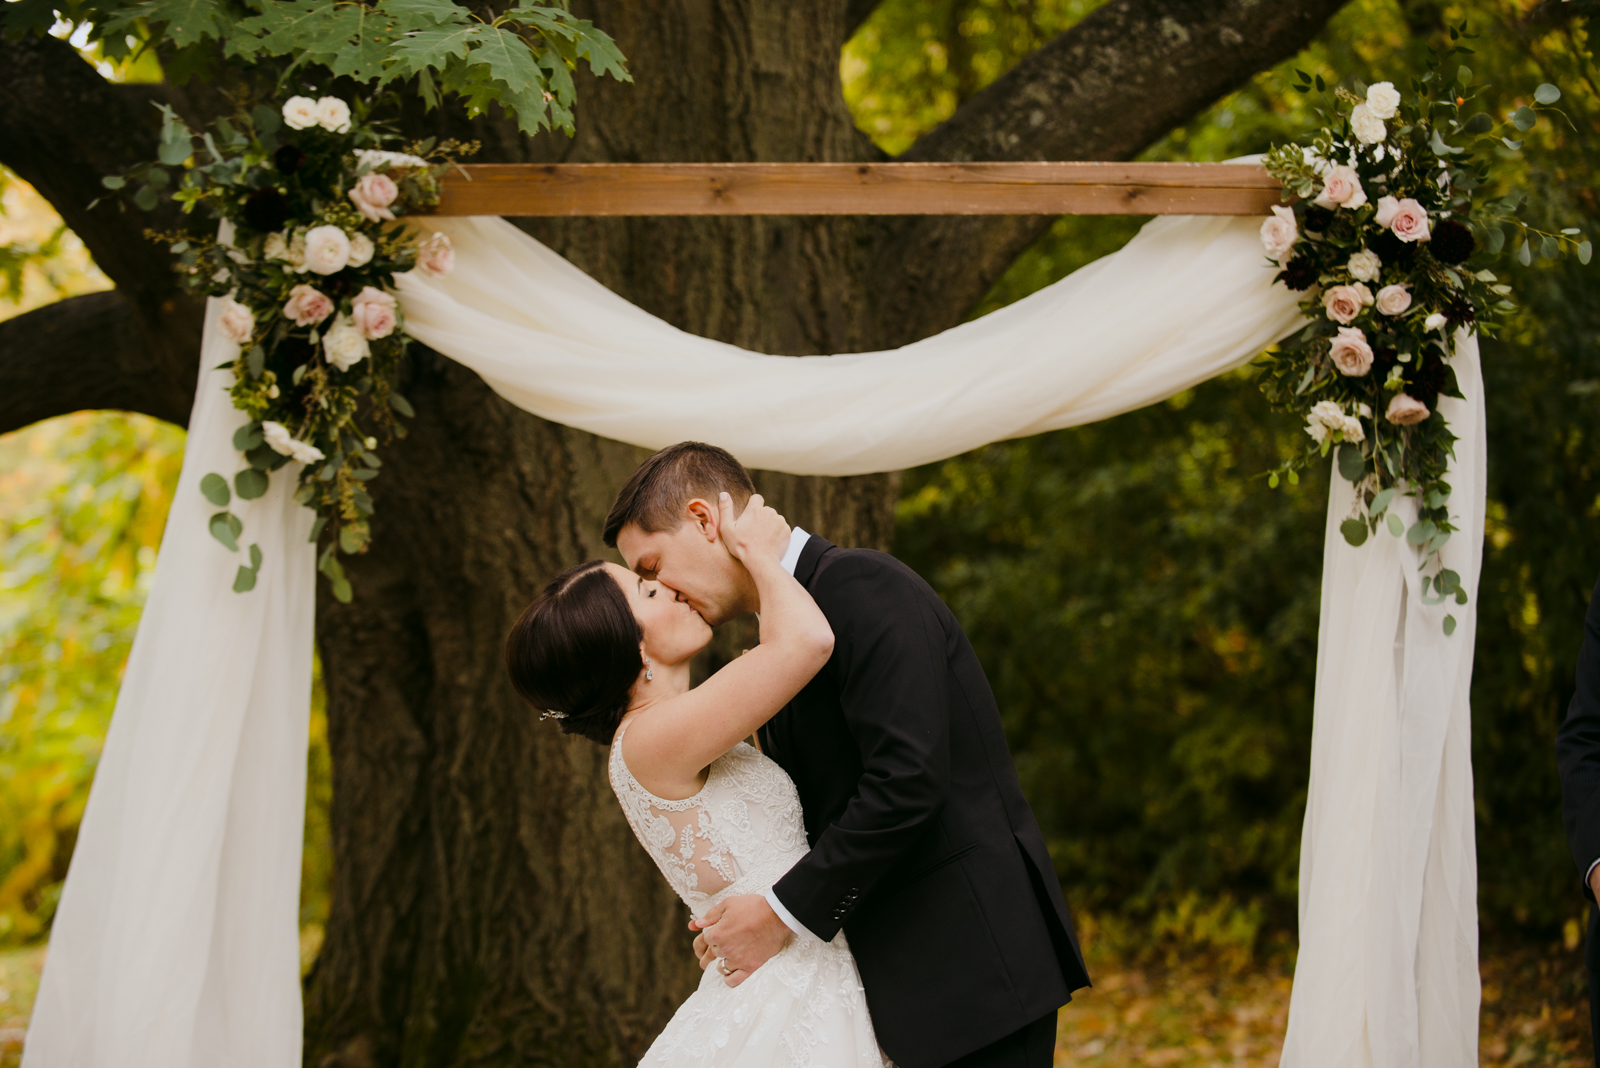 bride and groom first kiss under wooden arch during outdoor wedding ceremony